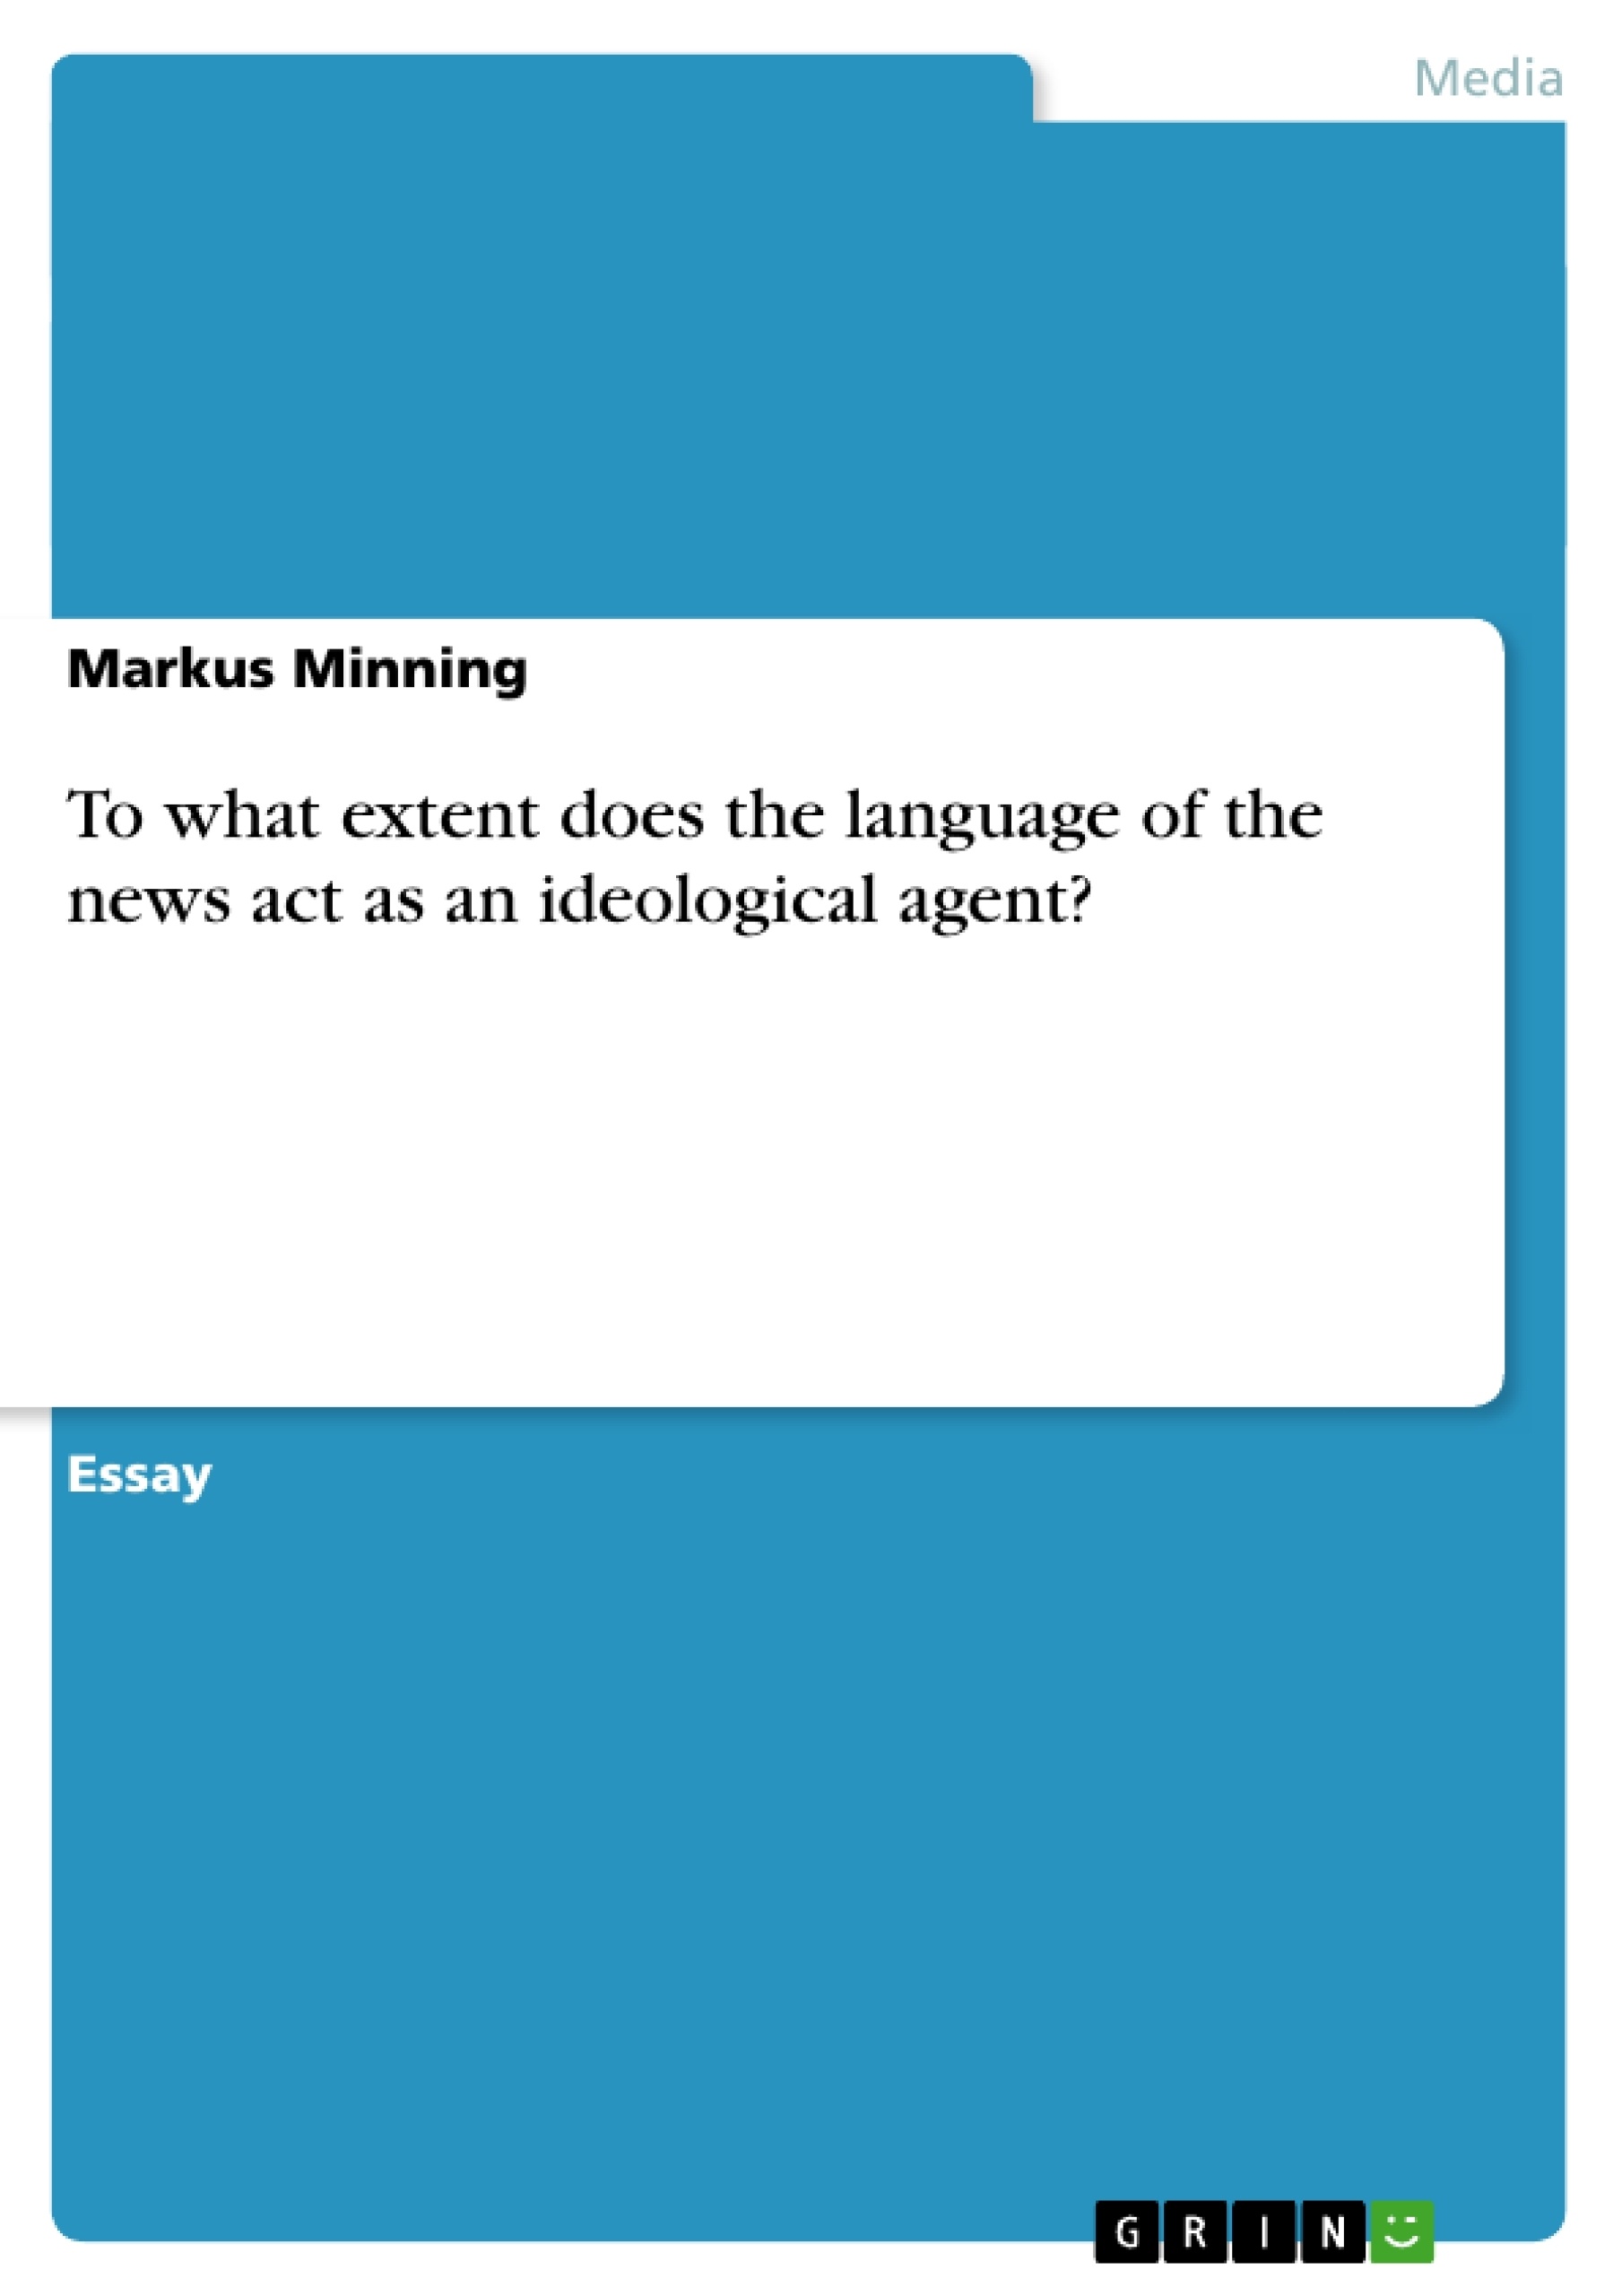 Title: To what extent does the language of the news act as an ideological agent?